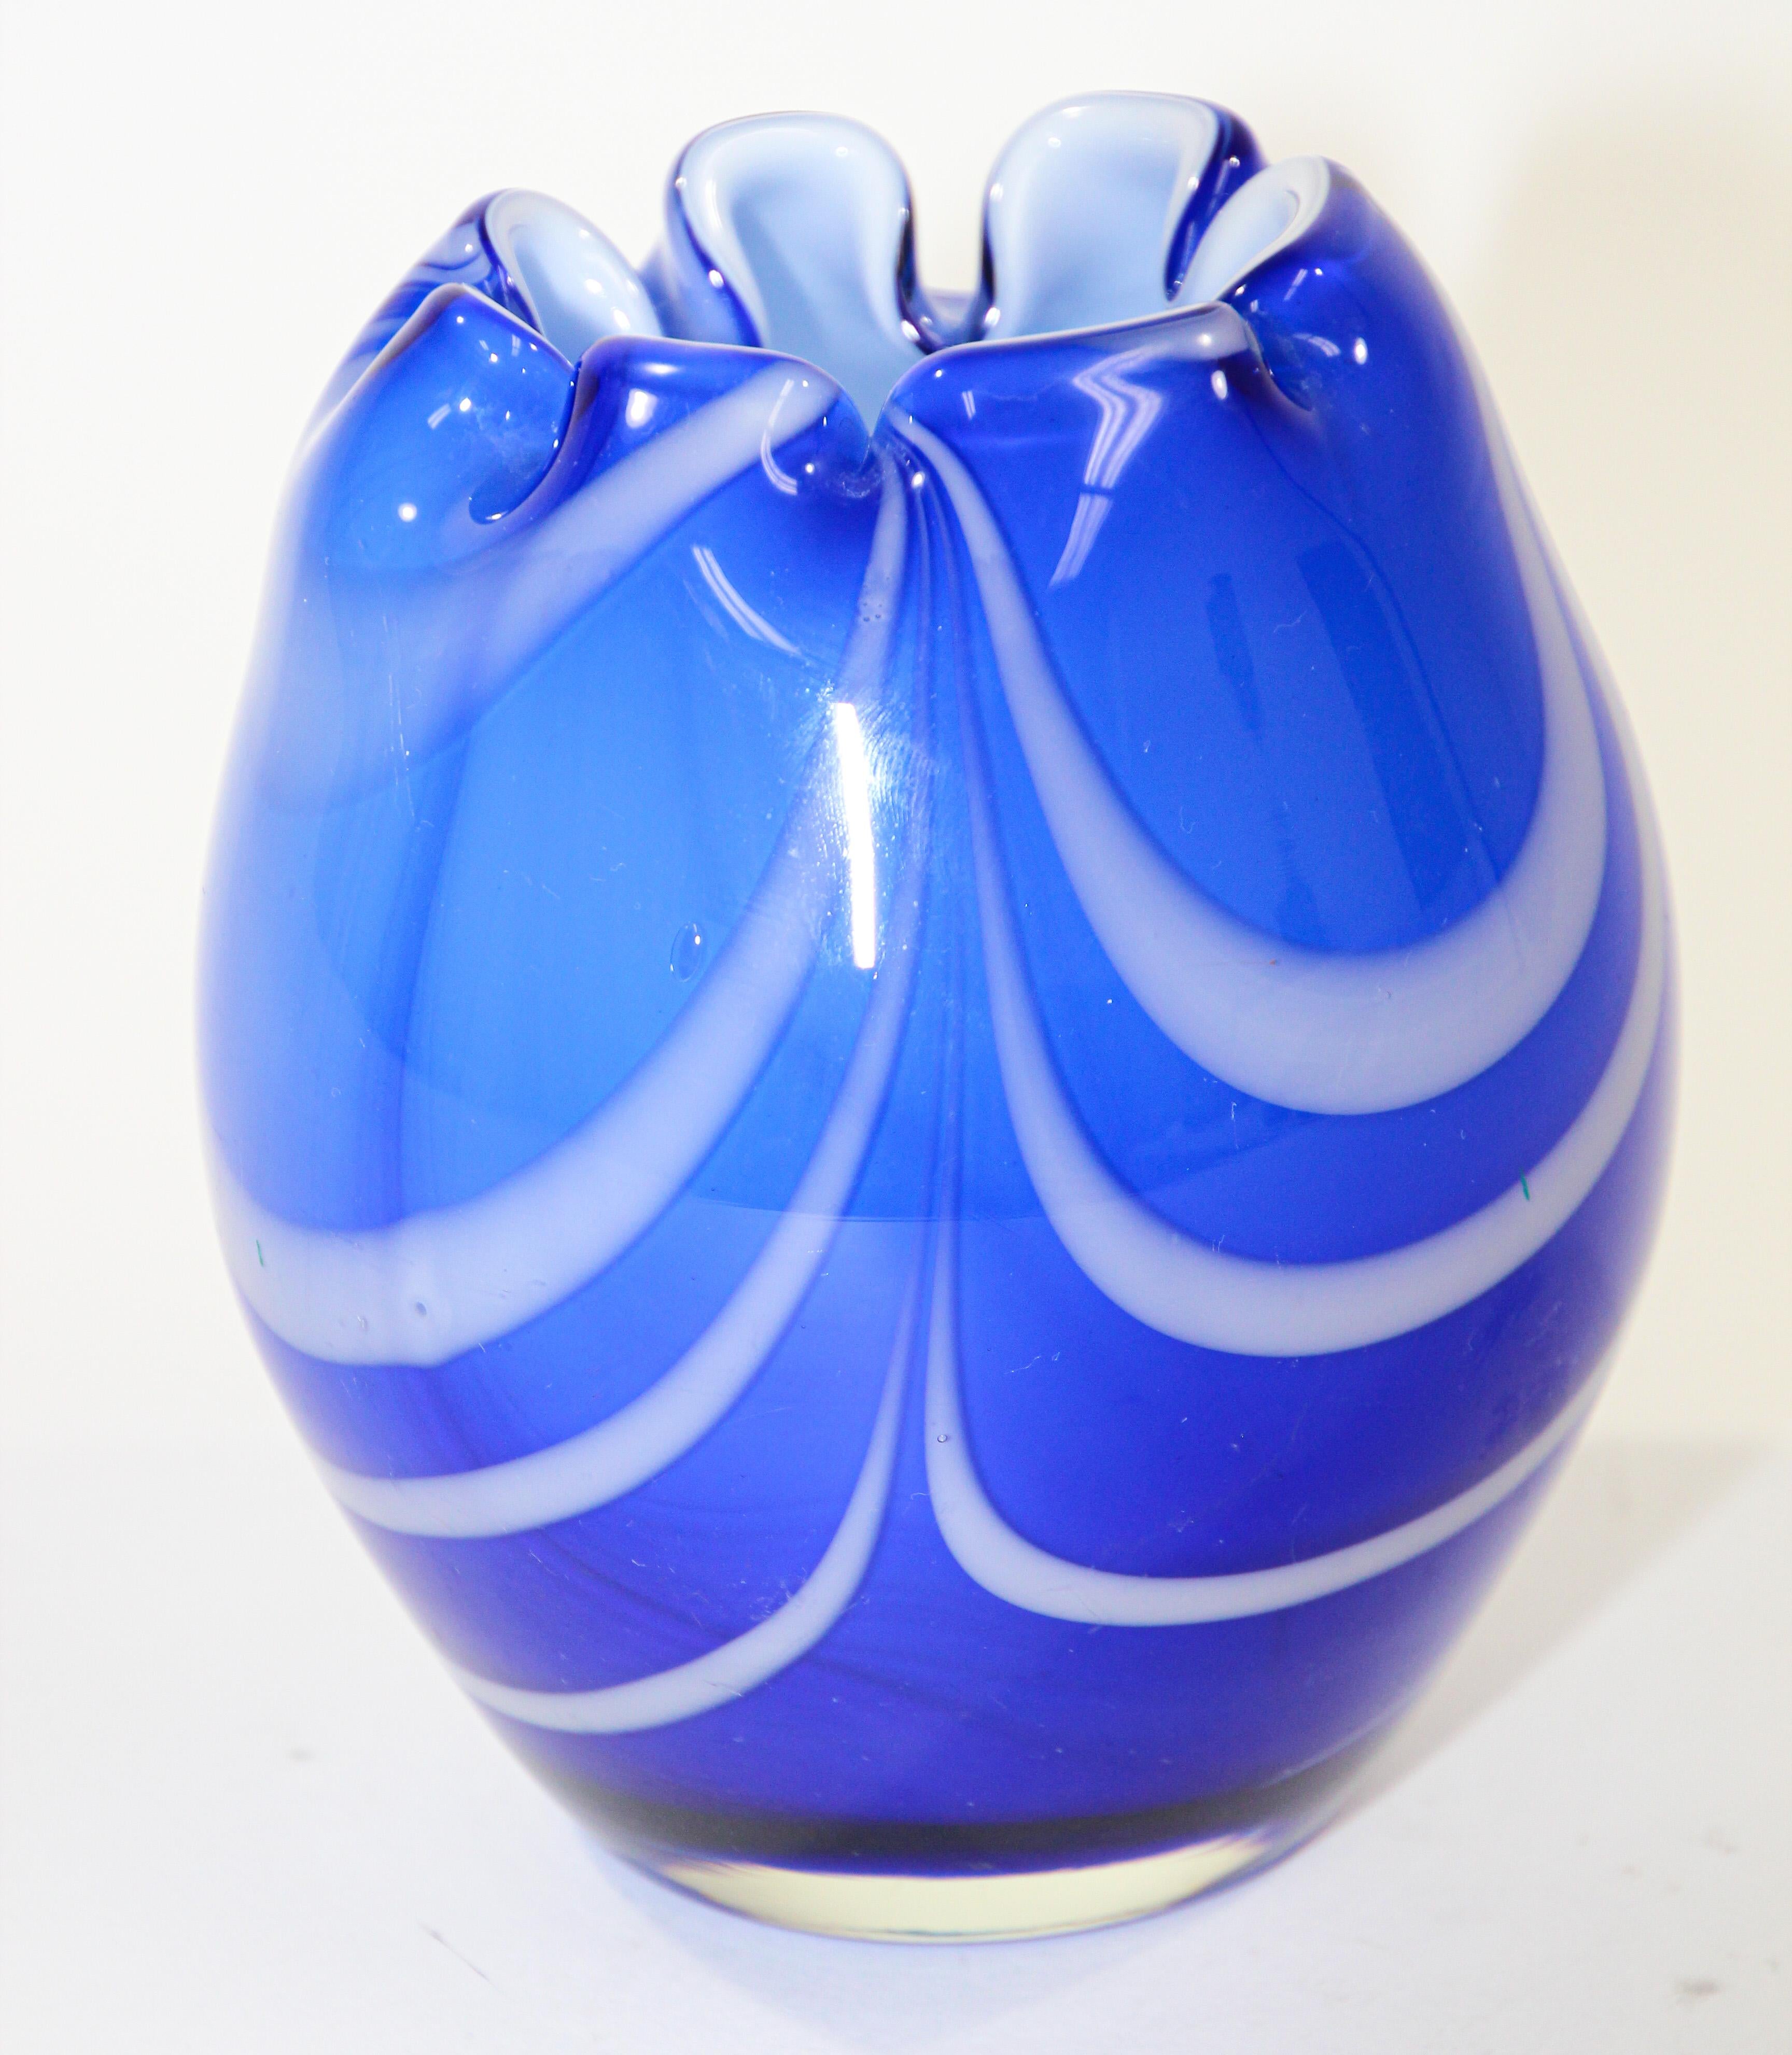 Hand blown Studio Art Glass vase in cobalt blue with white feathered design.
Vintage Fenton Dave FETTY Hand blown Studio Art Glass Collectible Vase.
Very nice vase vibrant cobalt blue and white pulled feather design.
Truly stunning collectible